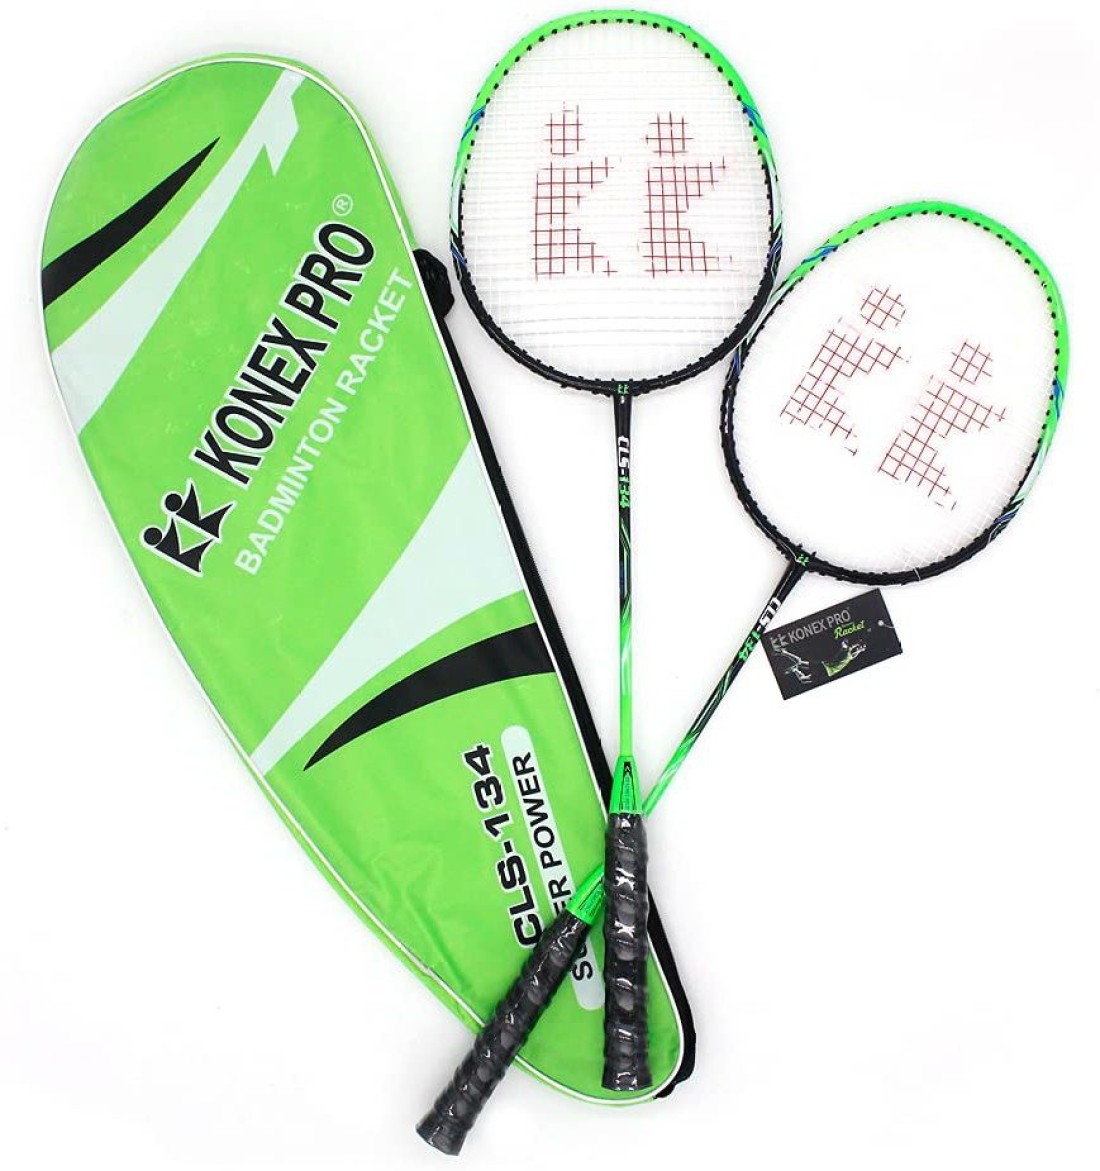 Buy Konex JOINTLESS Pair Badminton Racket with Cover- 1 Set of Two Rackets Green Strung Badminton Racquet Online at Best Prices in India